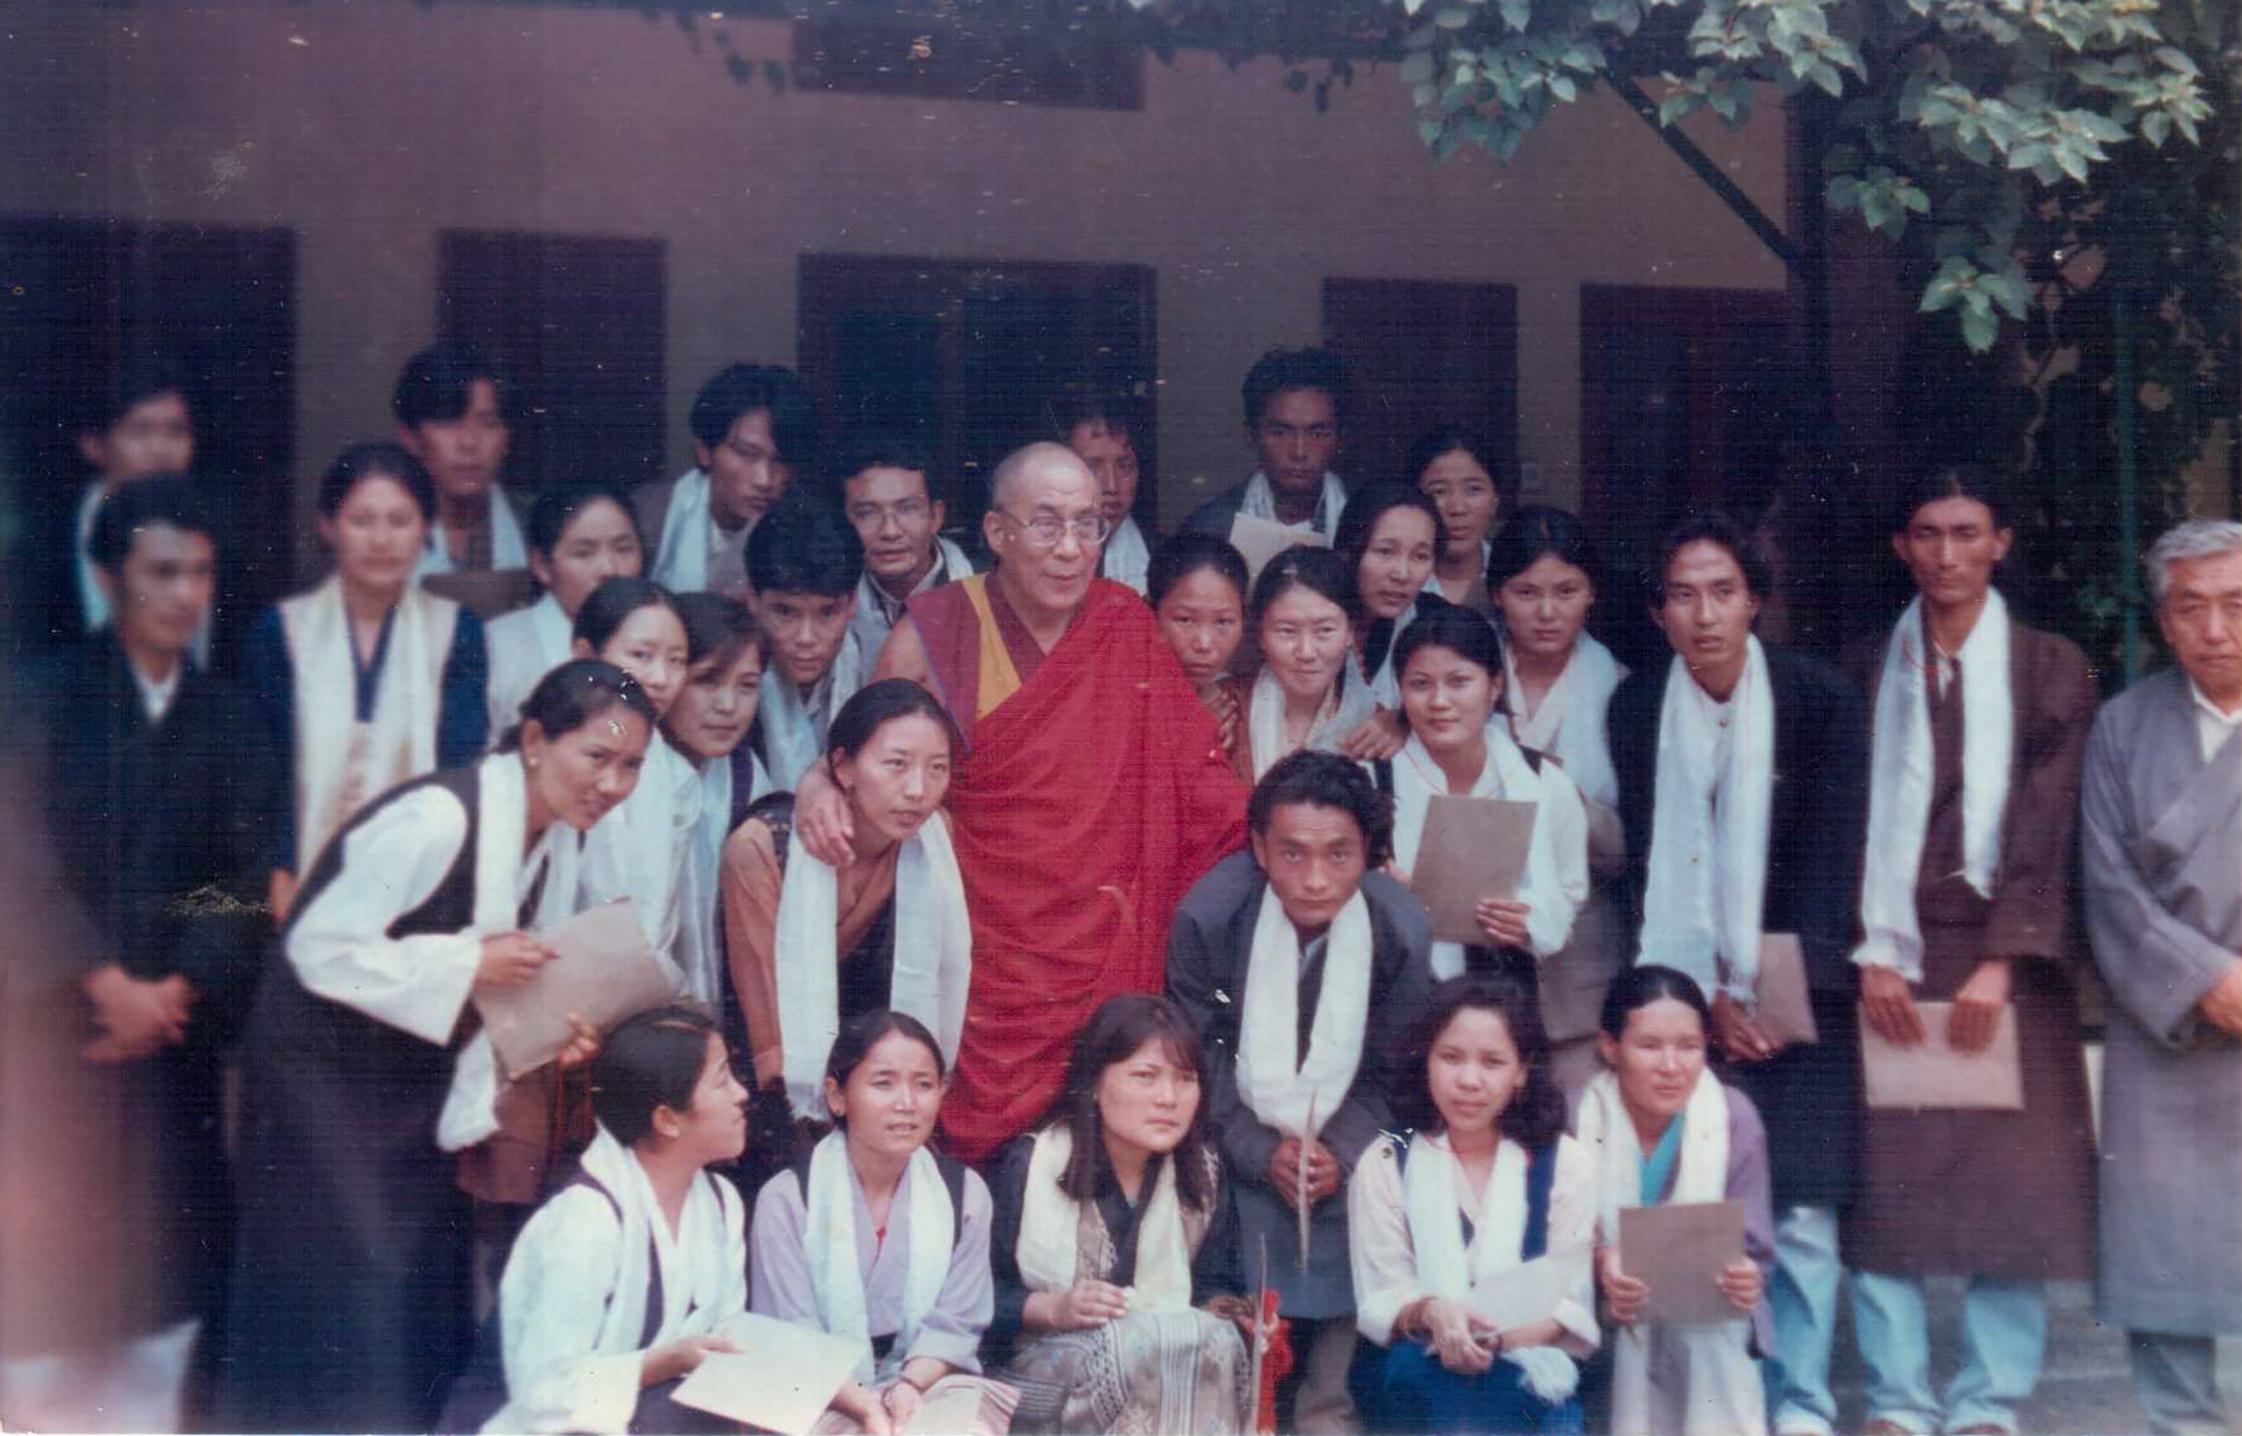 CTA staff receiving an audience with His Holiness the 14th Dalai Lama, 1998. 